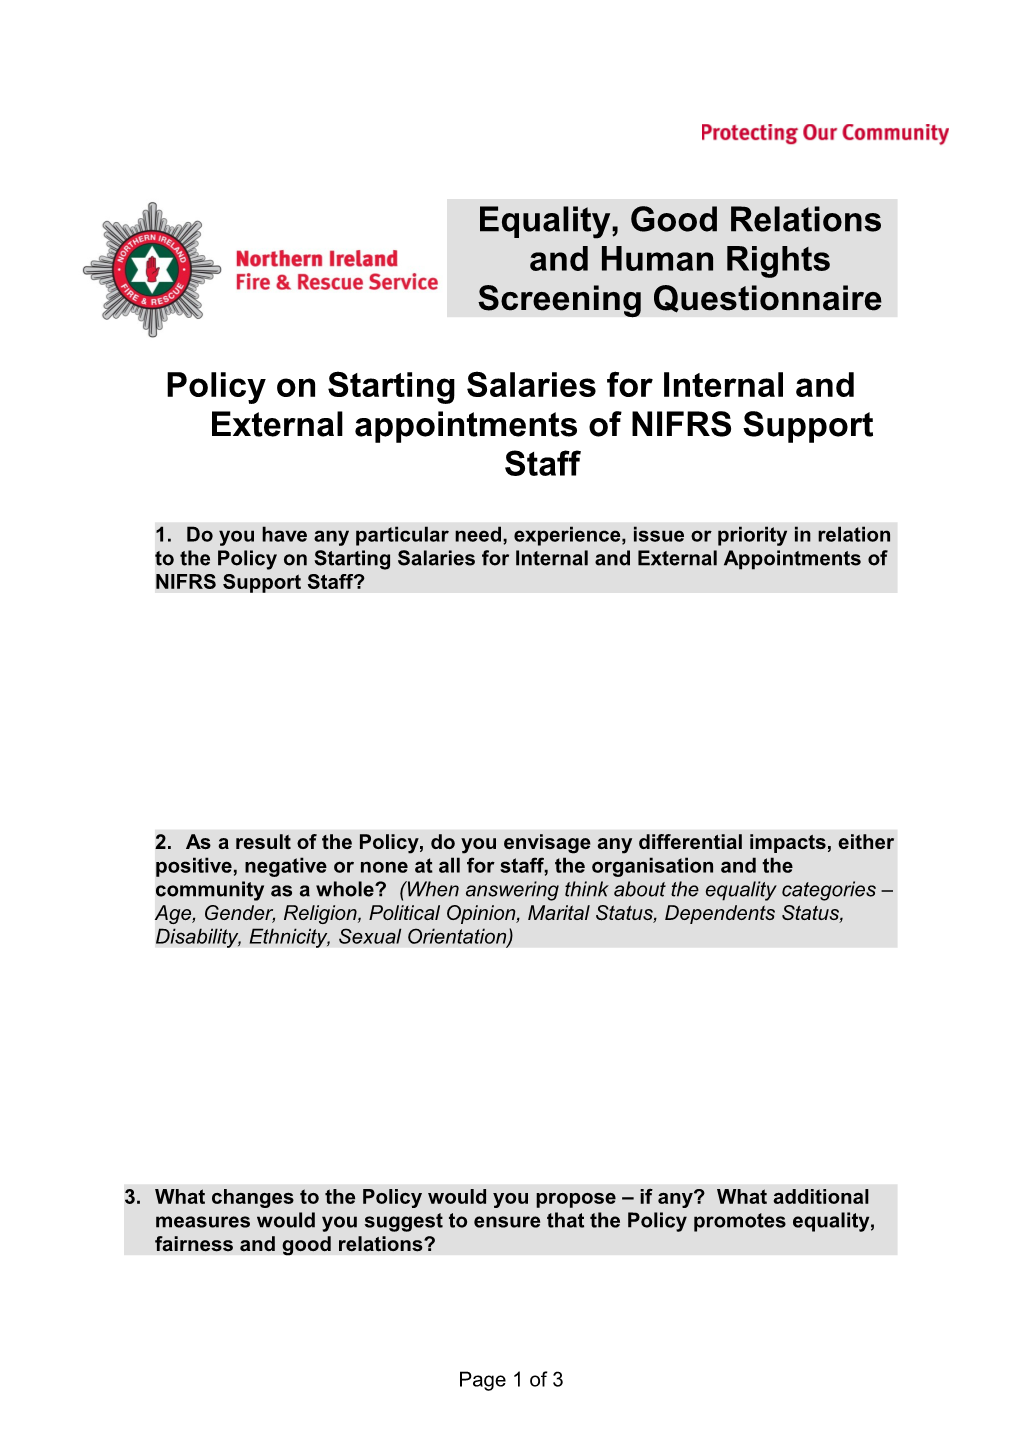 Equality, Good Relations and Human Rights Screening Questionnaire